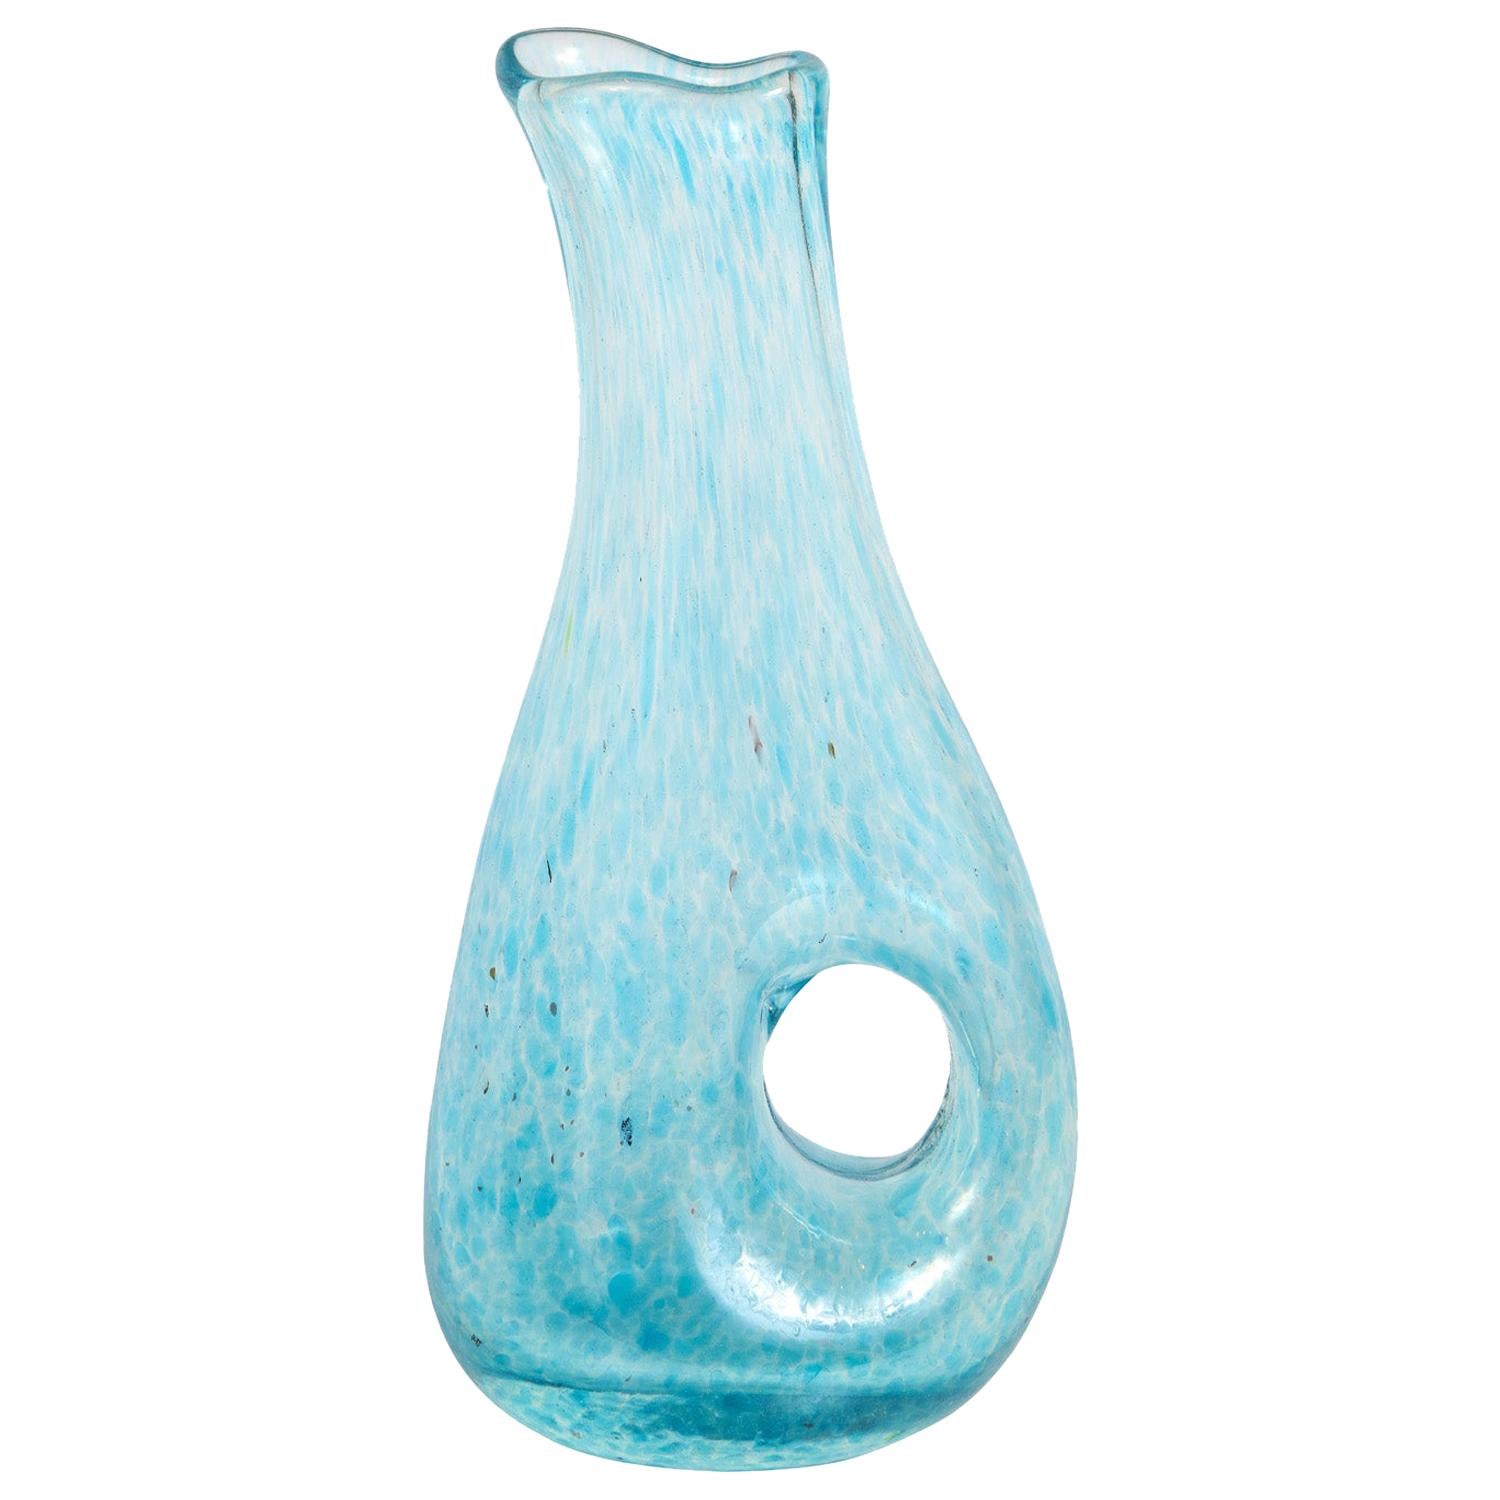 A.V.E.M. Hand Blown Glass with Blue Glass Fragments and Hole, 1950s For Sale